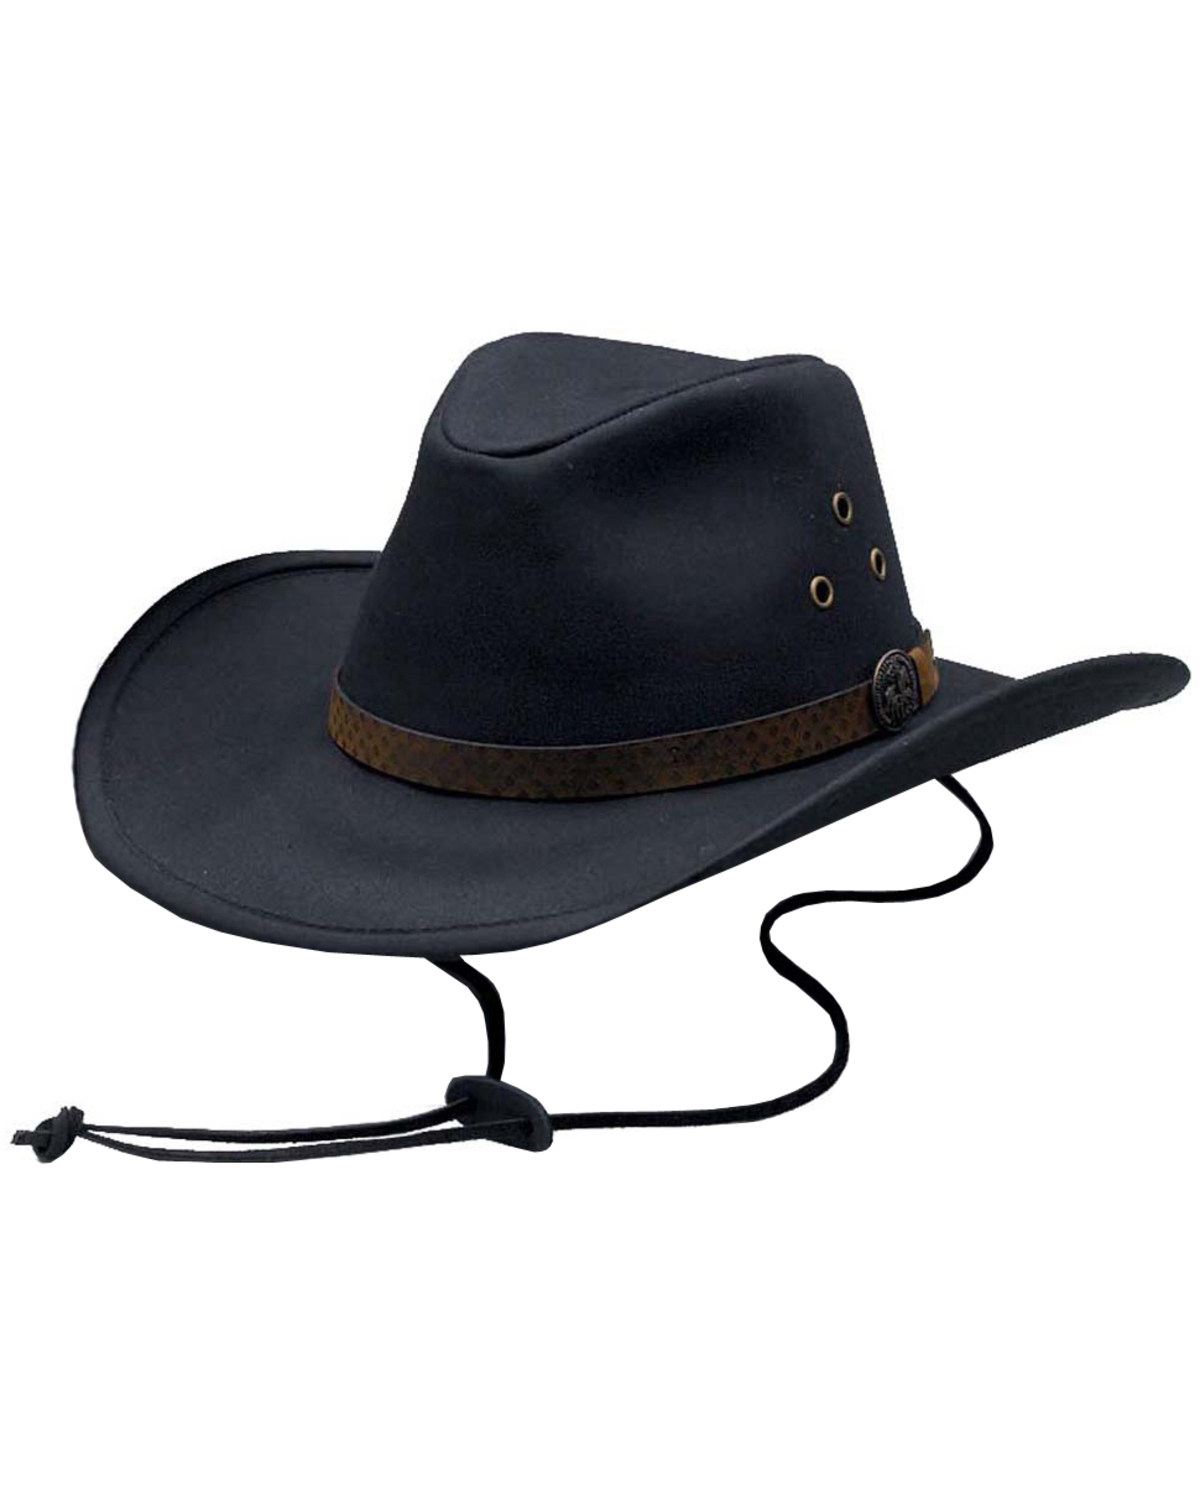 Outback Trading Co. Oilskin Trapper Hat